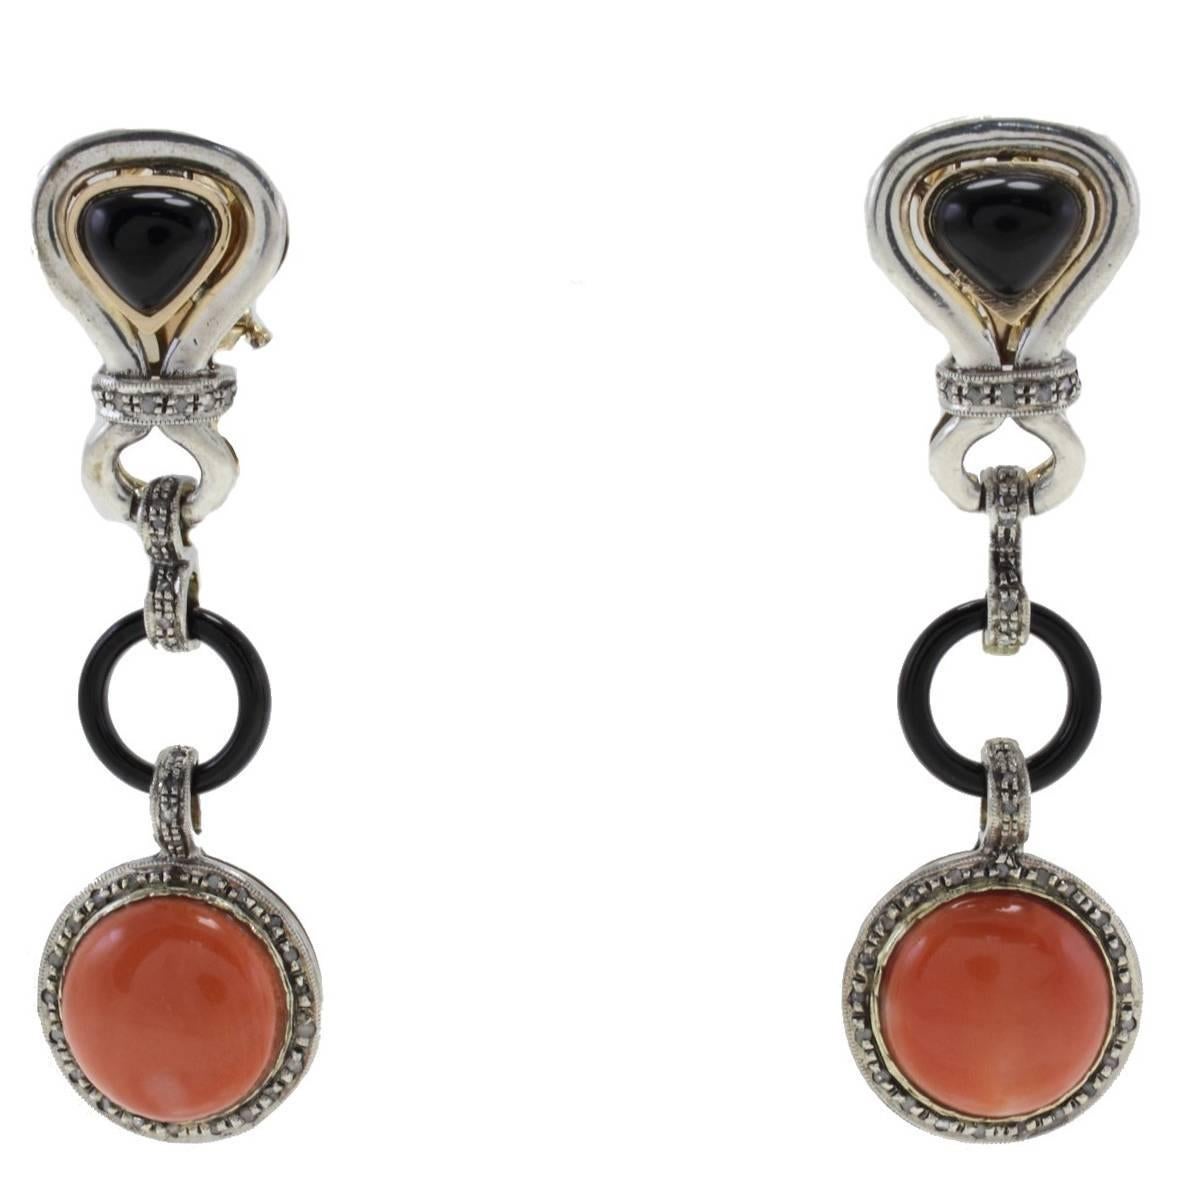 Diamonds, Onyx, Red Coral Buttons, 14 Kt Rose Gold and Silver Dangle Earrings